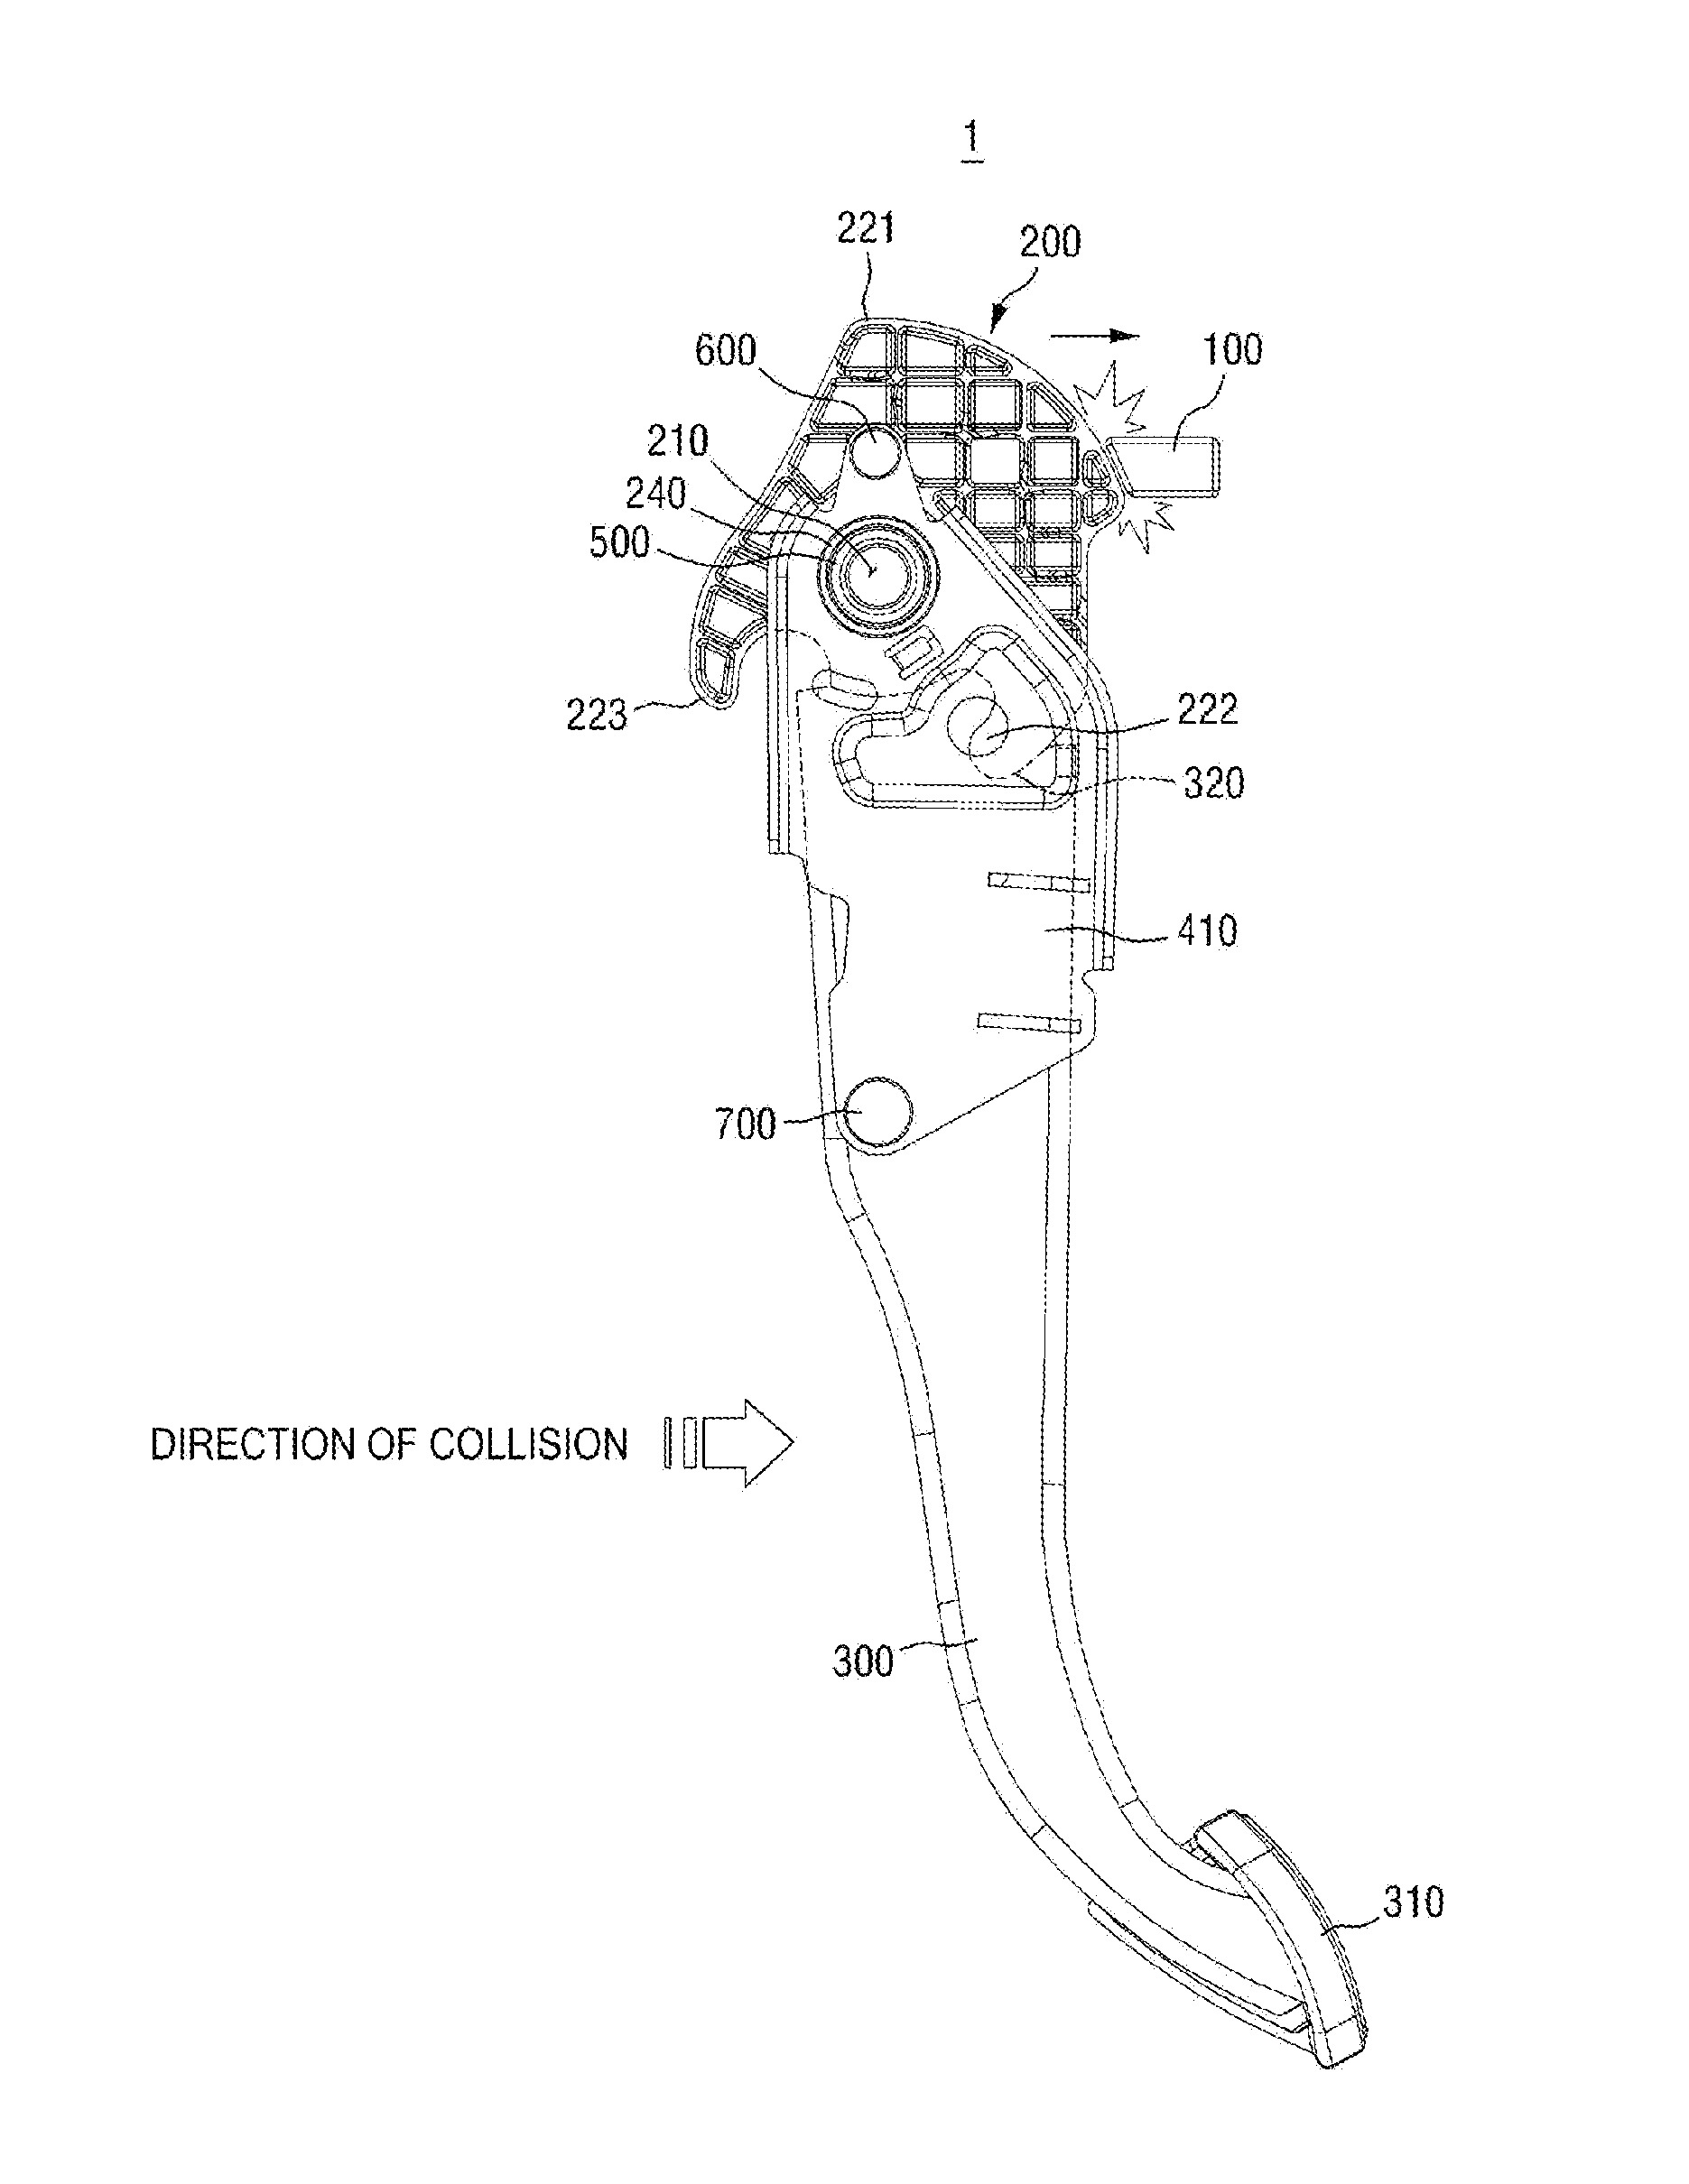 Apparatus for preventing automotive pedal from being pushed rearward